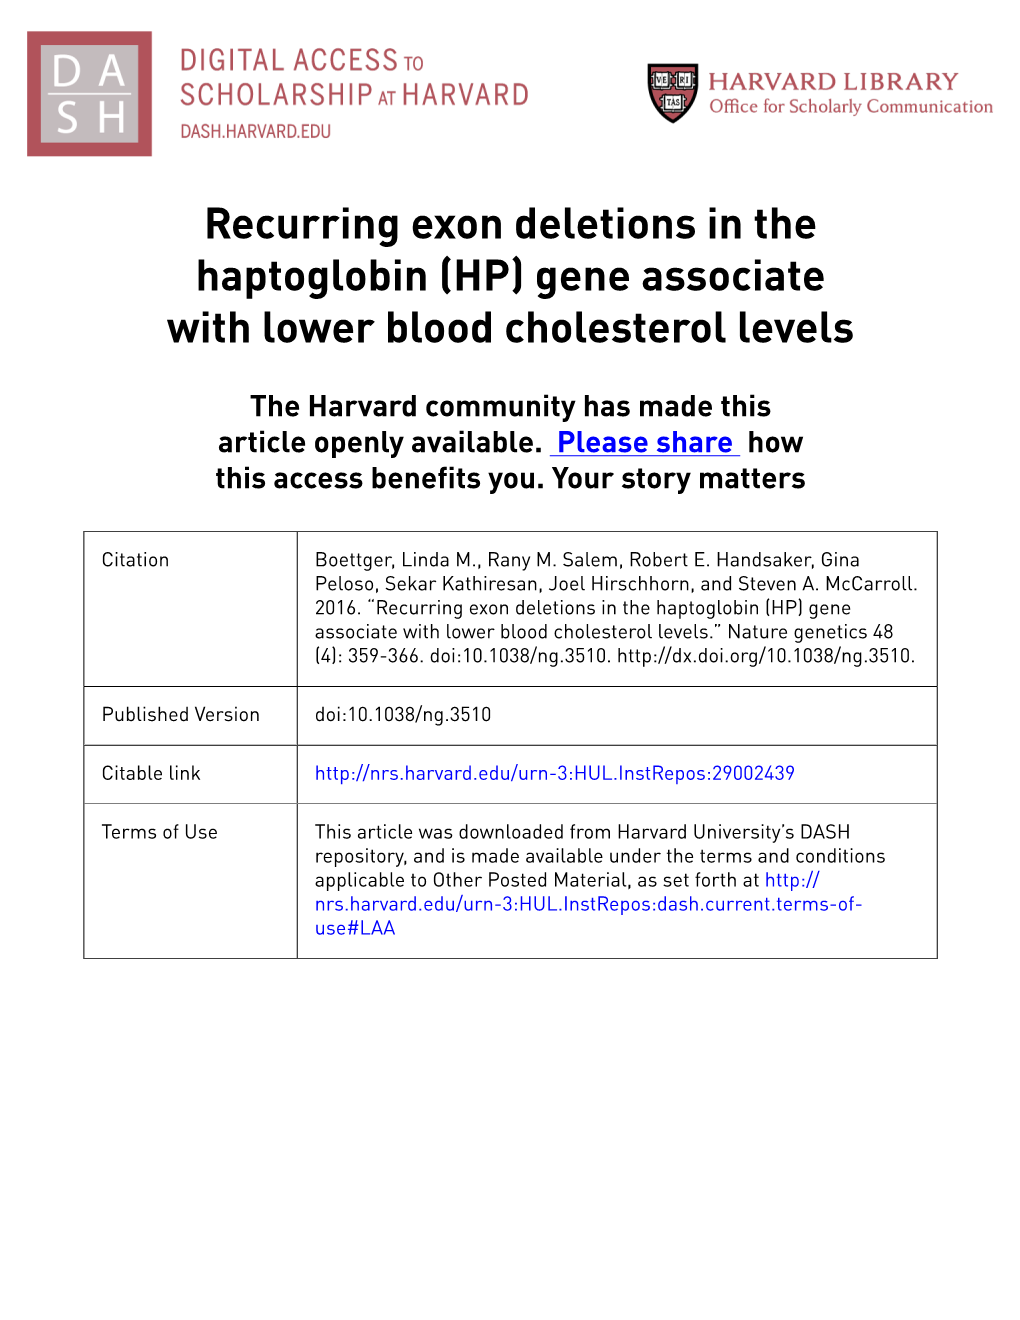 Recurring Exon Deletions in the Haptoglobin (HP) Gene Associate with Lower Blood Cholesterol Levels